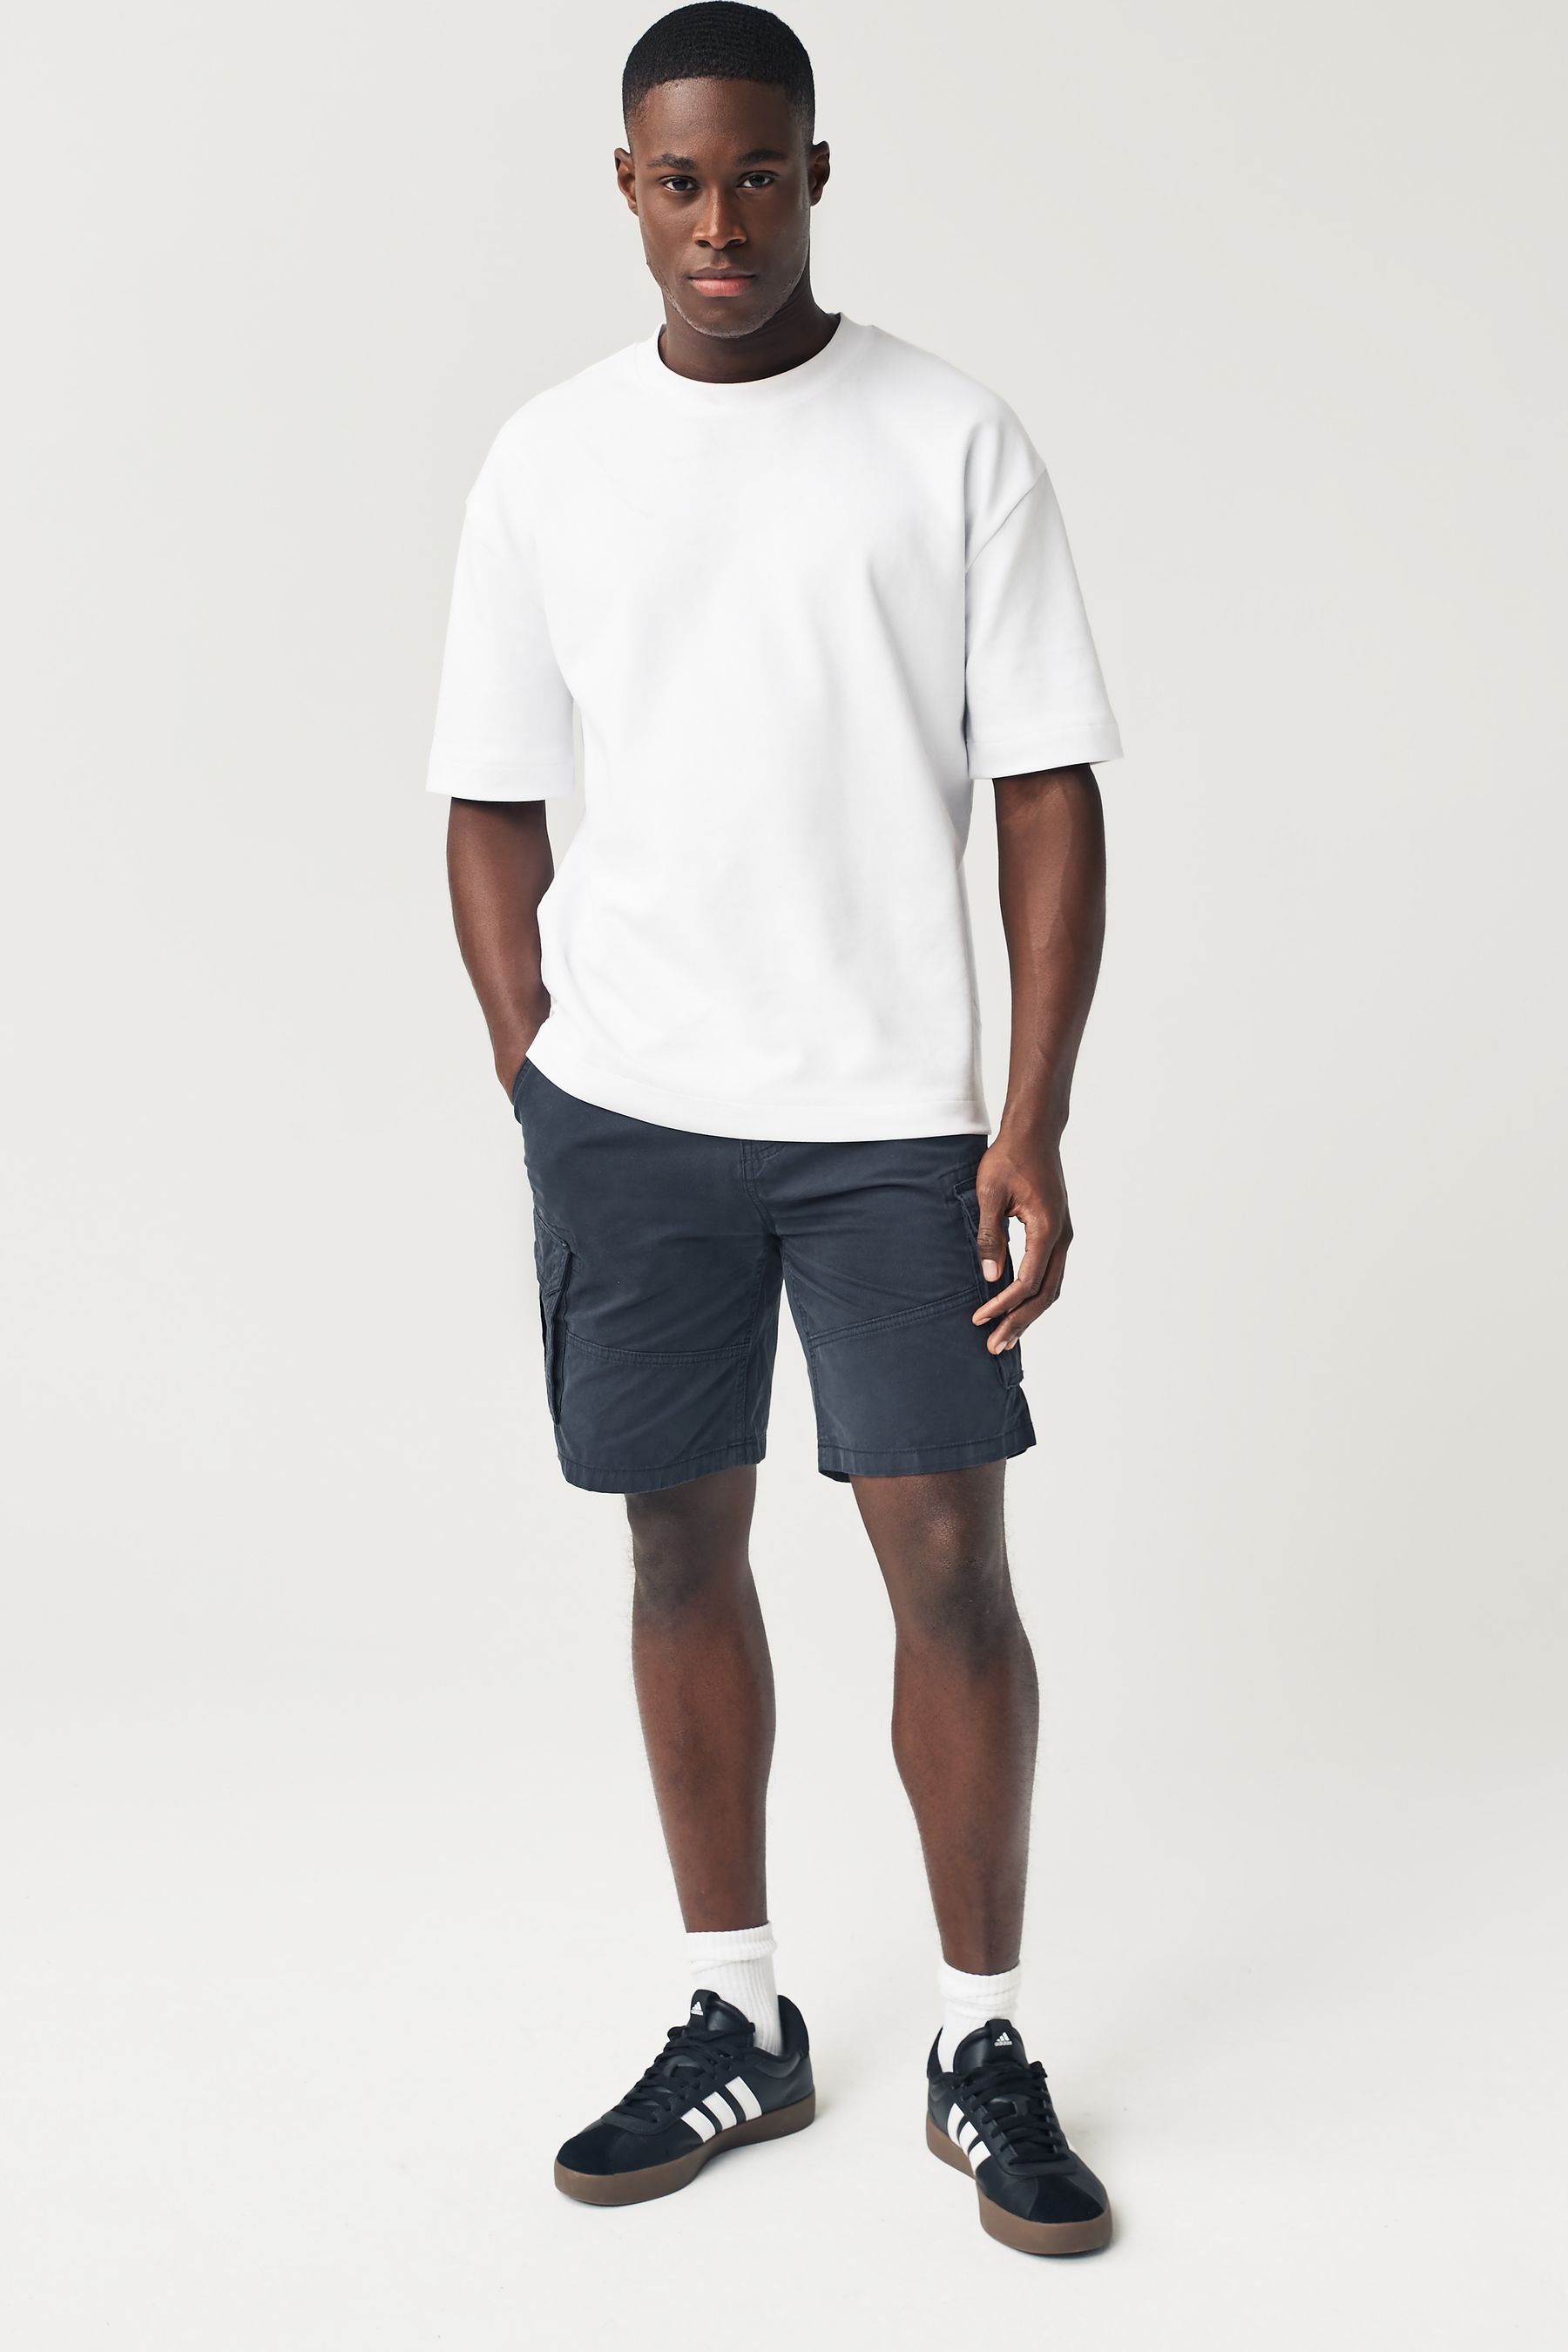 Buy Navy Blue Cotton Cargo Shorts from the Next UK online shop